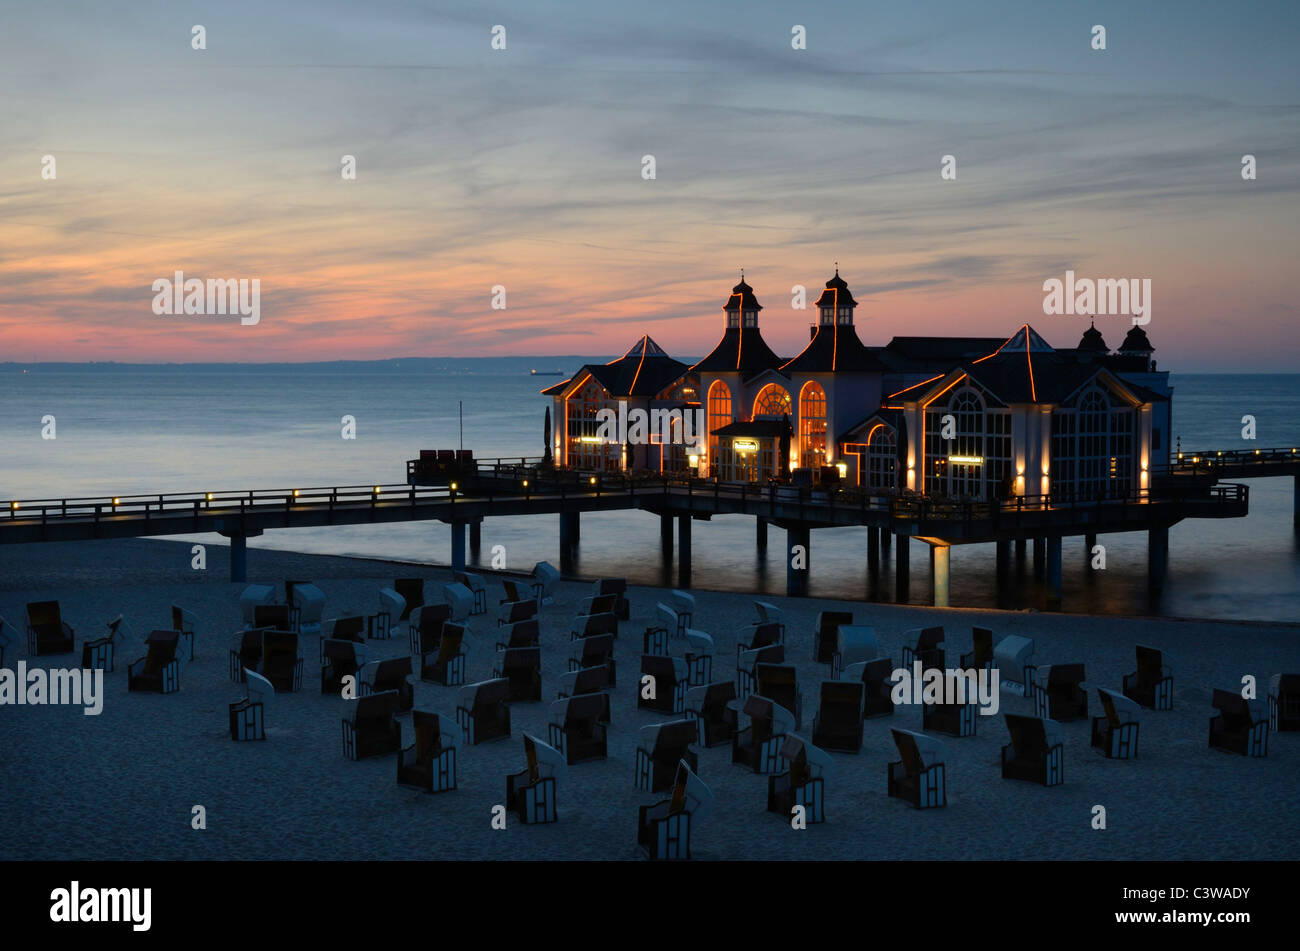 Pier of Sellin on German island of Rugen, Baltic Coast, at night Stock Photo